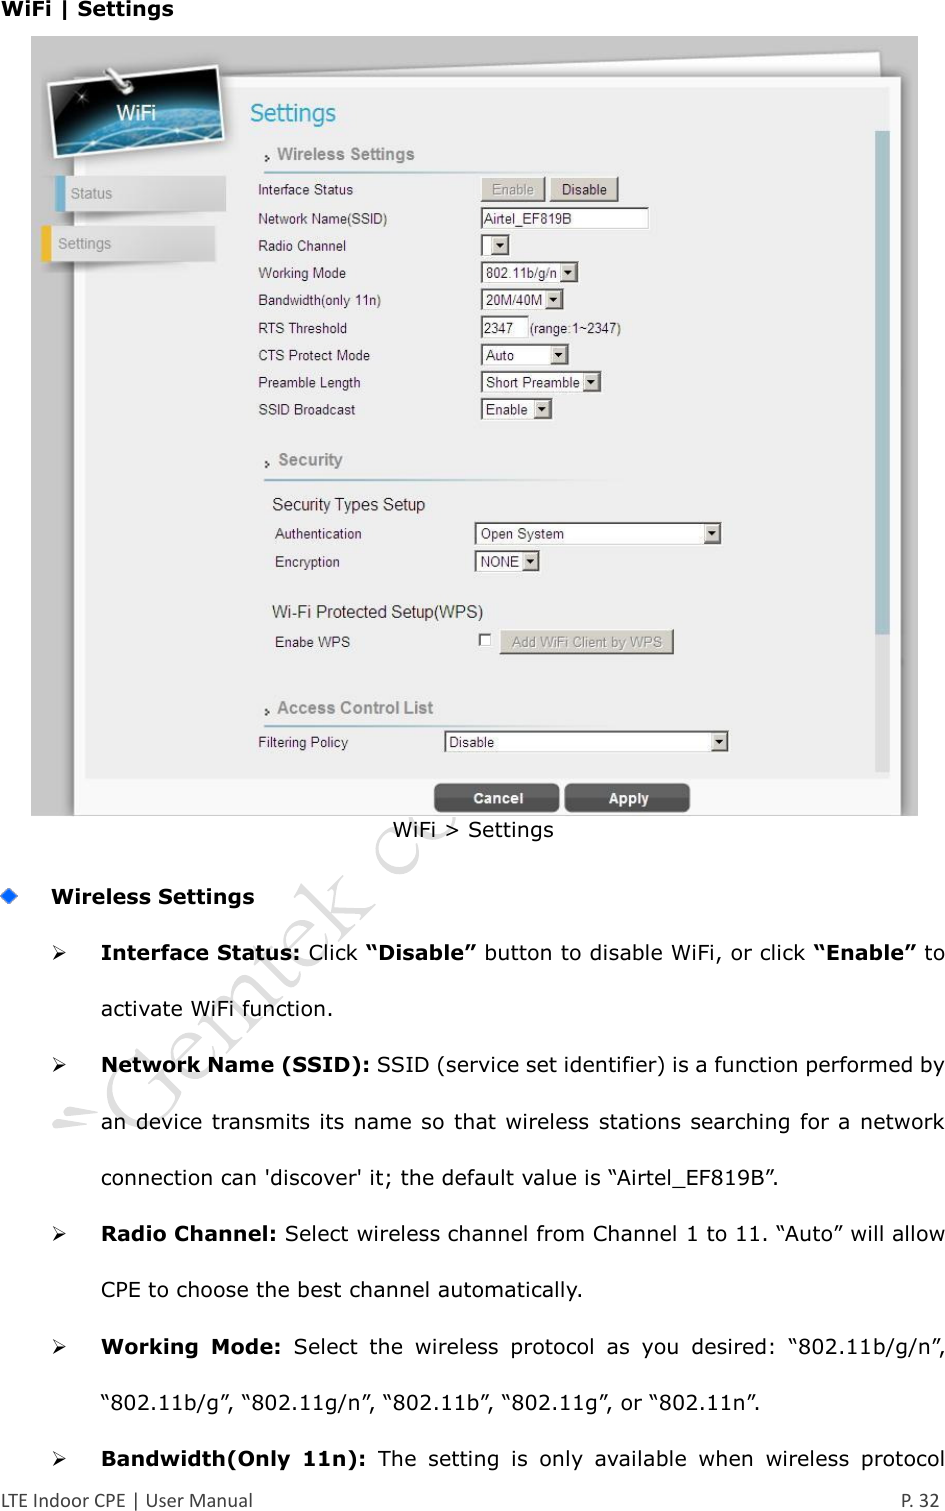  LTE Indoor CPE | User Manual      P. 32 WiFi | Settings  WiFi &gt; Settings   Wireless Settings  Interface Status: Click “Disable” button to disable WiFi, or click “Enable” to activate WiFi function.  Network Name (SSID): SSID (service set identifier) is a function performed by an device transmits its name so that wireless  stations searching for a network connection can &apos;discover&apos; it; the default value is “Airtel_EF819B”.  Radio Channel: Select wireless channel from Channel 1 to 11. “Auto” will allow CPE to choose the best channel automatically.  Working  Mode:  Select  the  wireless  protocol  as  you  desired:  “802.11b/g/n”, “802.11b/g”, “802.11g/n”, “802.11b”, “802.11g”, or “802.11n”.  Bandwidth(Only  11n):  The  setting  is  only  available  when  wireless  protocol 